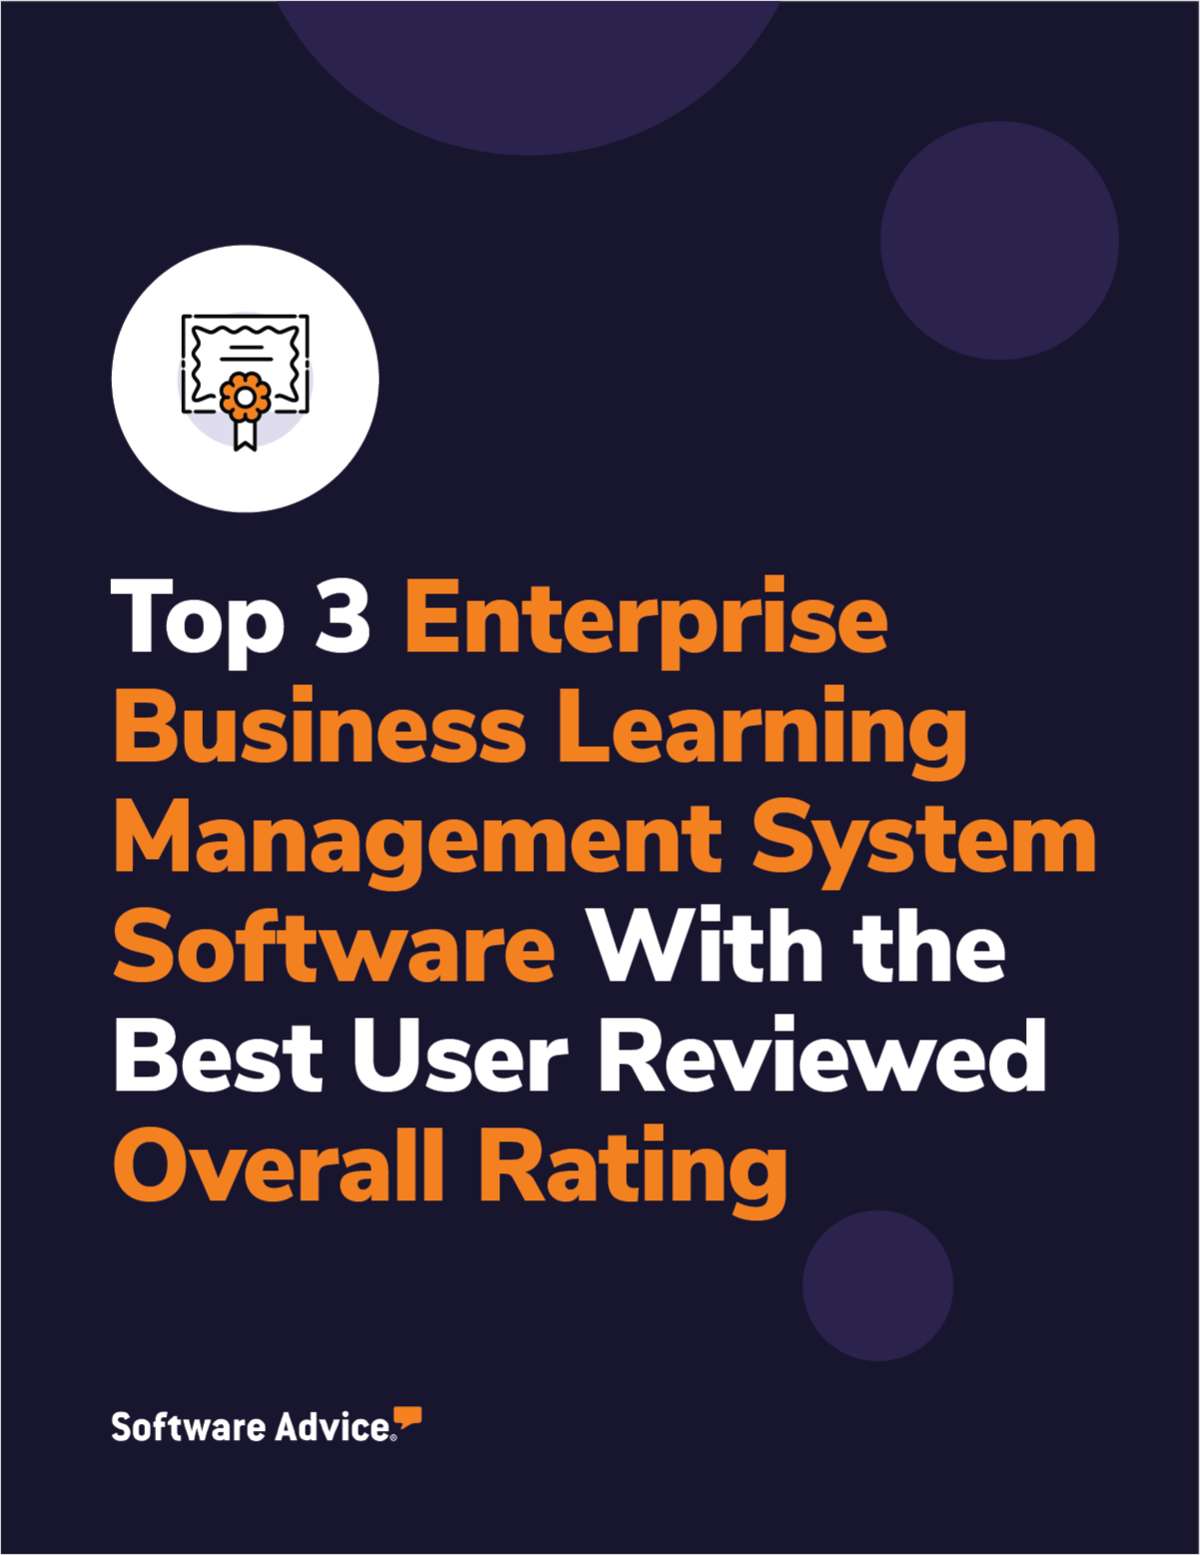 Top 3 Enterprise Business Learning Management System Software With the Best User Reviewed Overall Rating